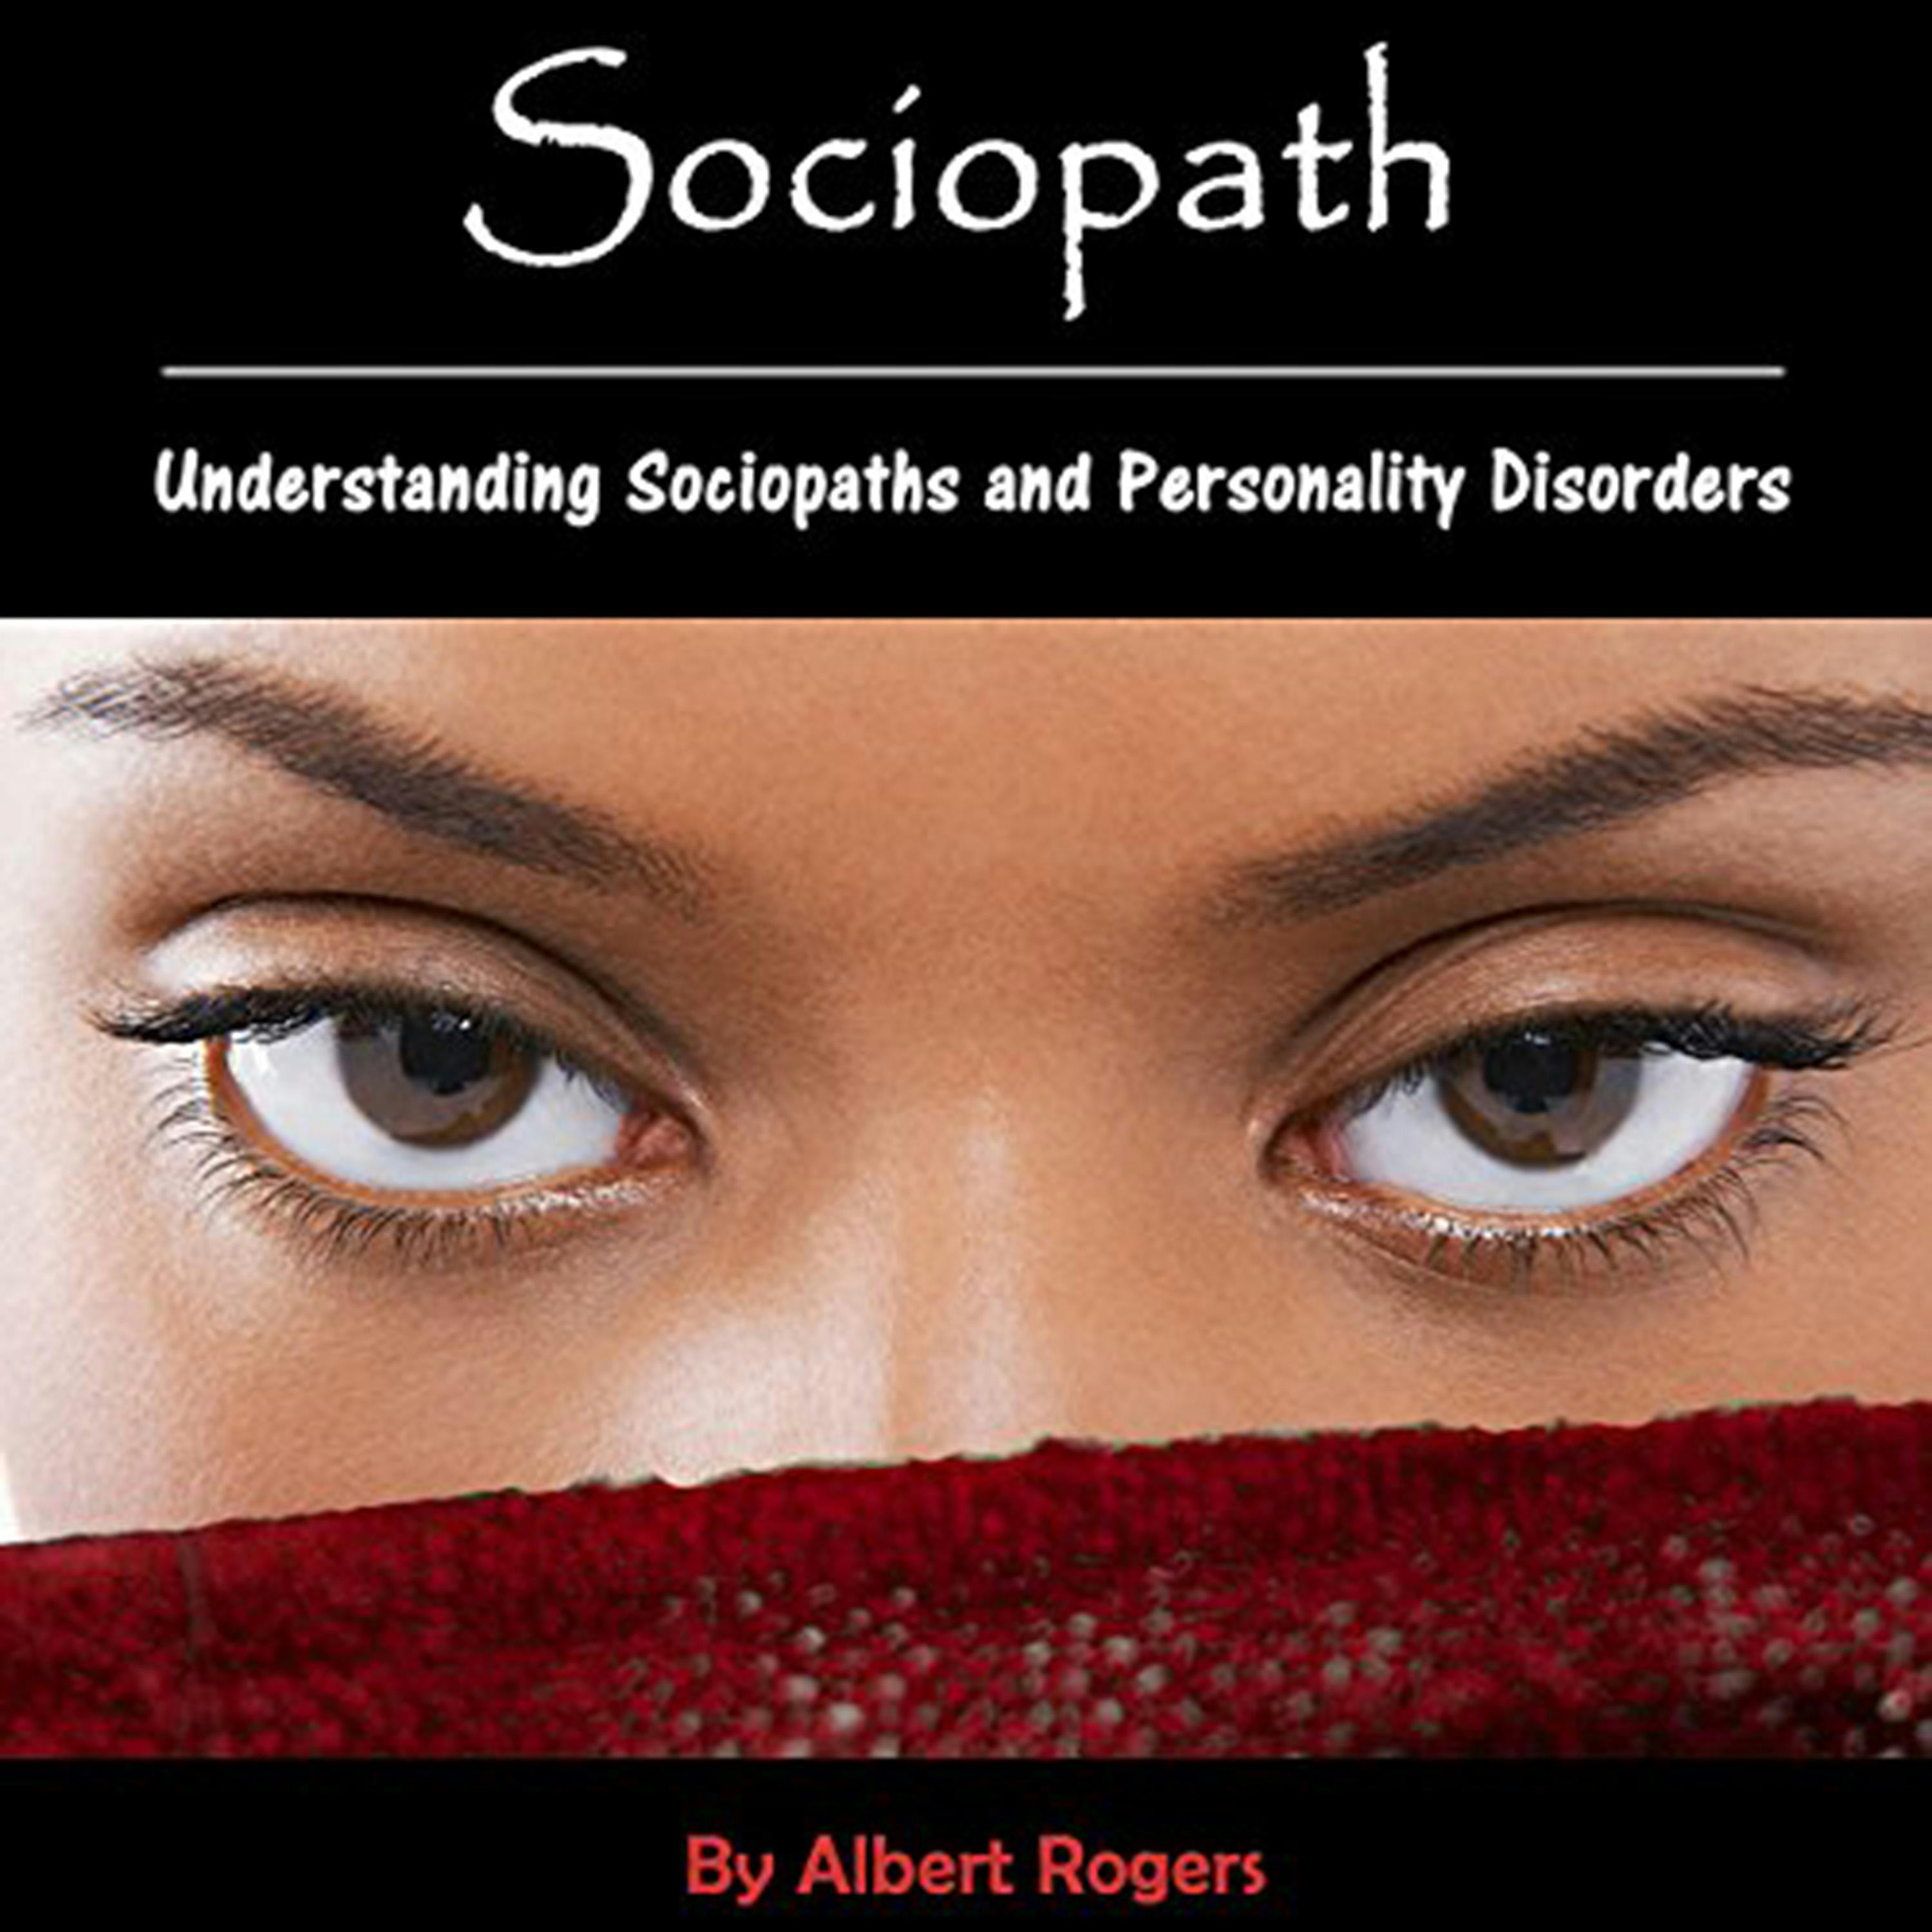 Sociopath: Understanding Sociopaths and Personality Disorders - Albert Rogers